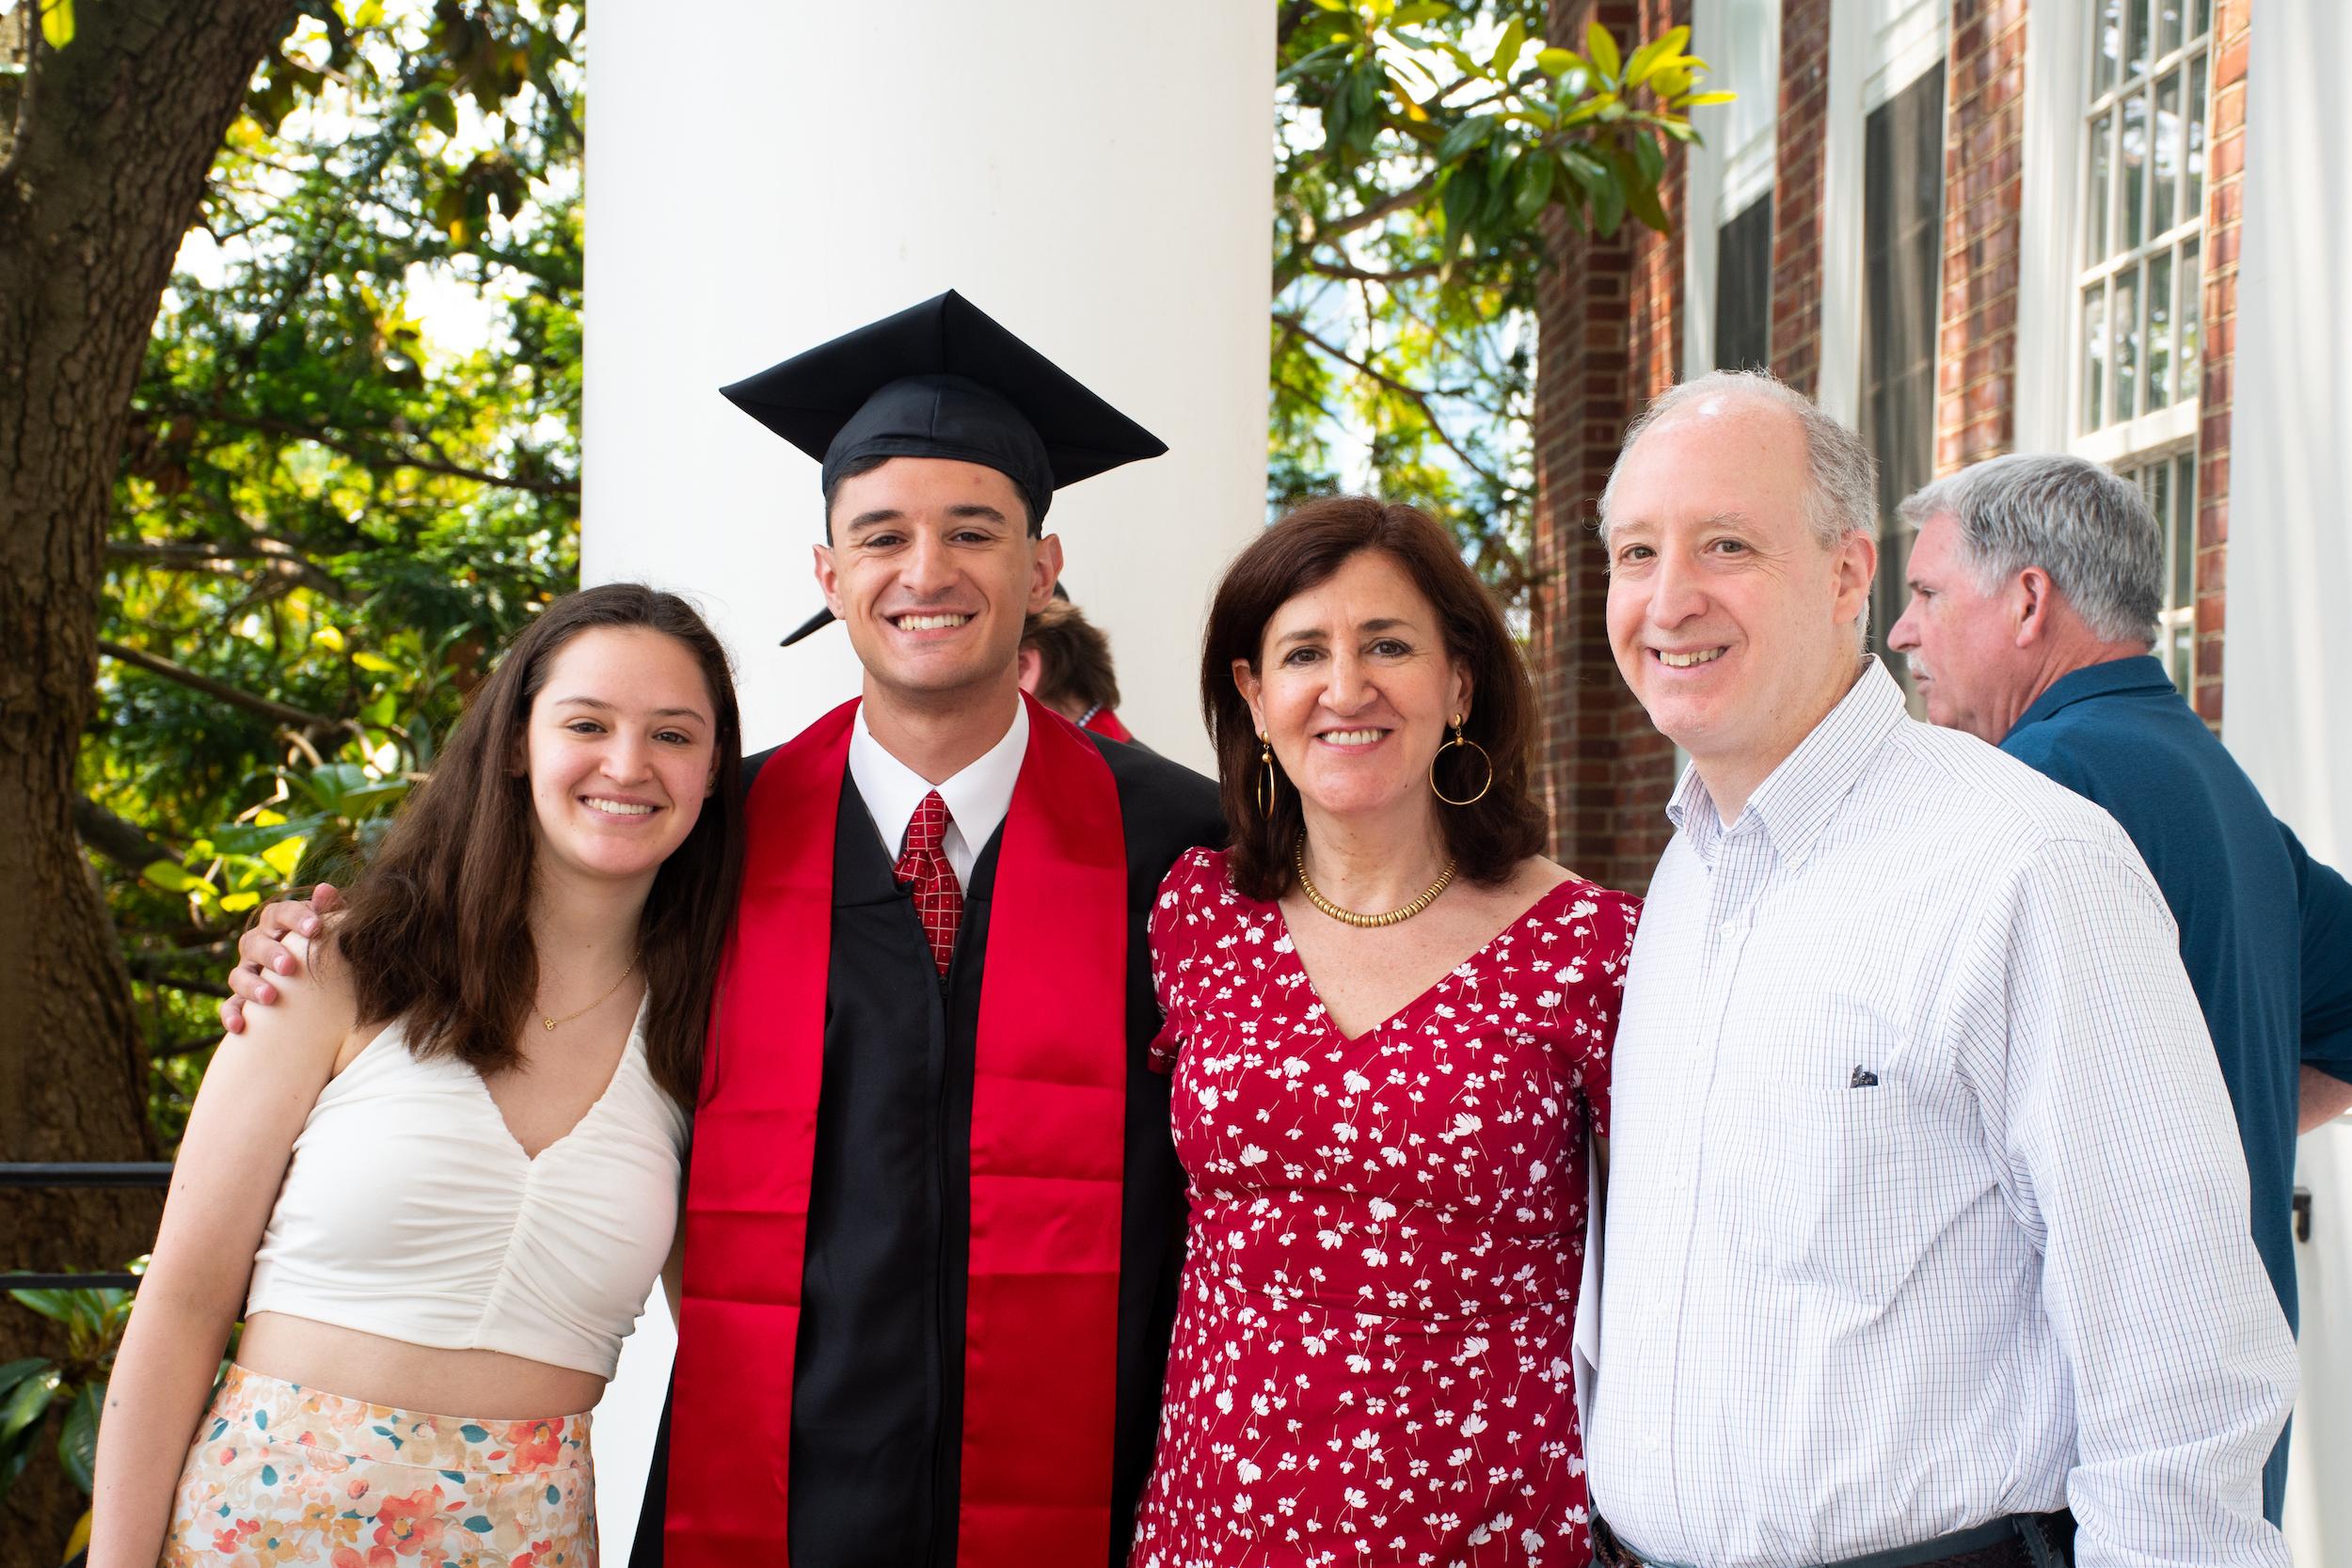 Family at commencement